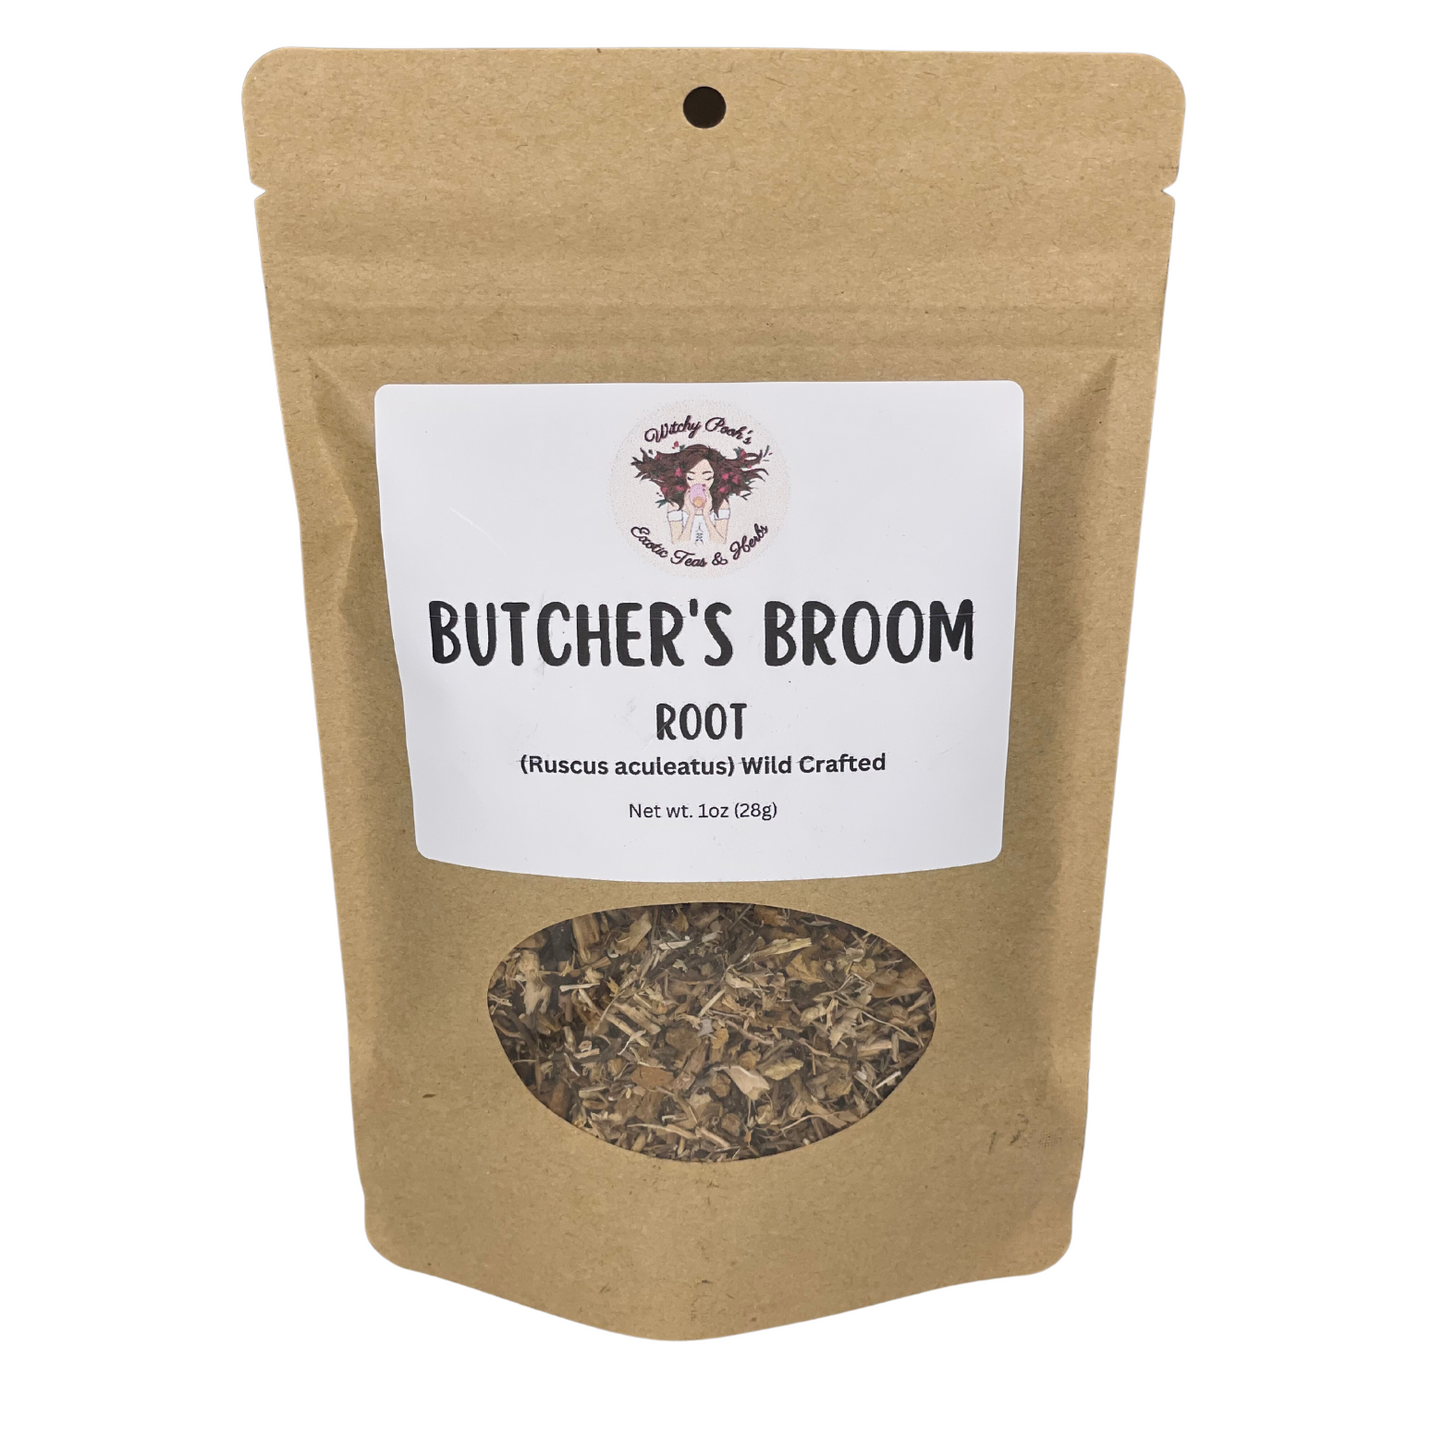 Butcher's Broom Root, Pieces of Root, Dried Herbs, Food Grade Herbs, Herbs and Spices, Loose Leaf Herbs